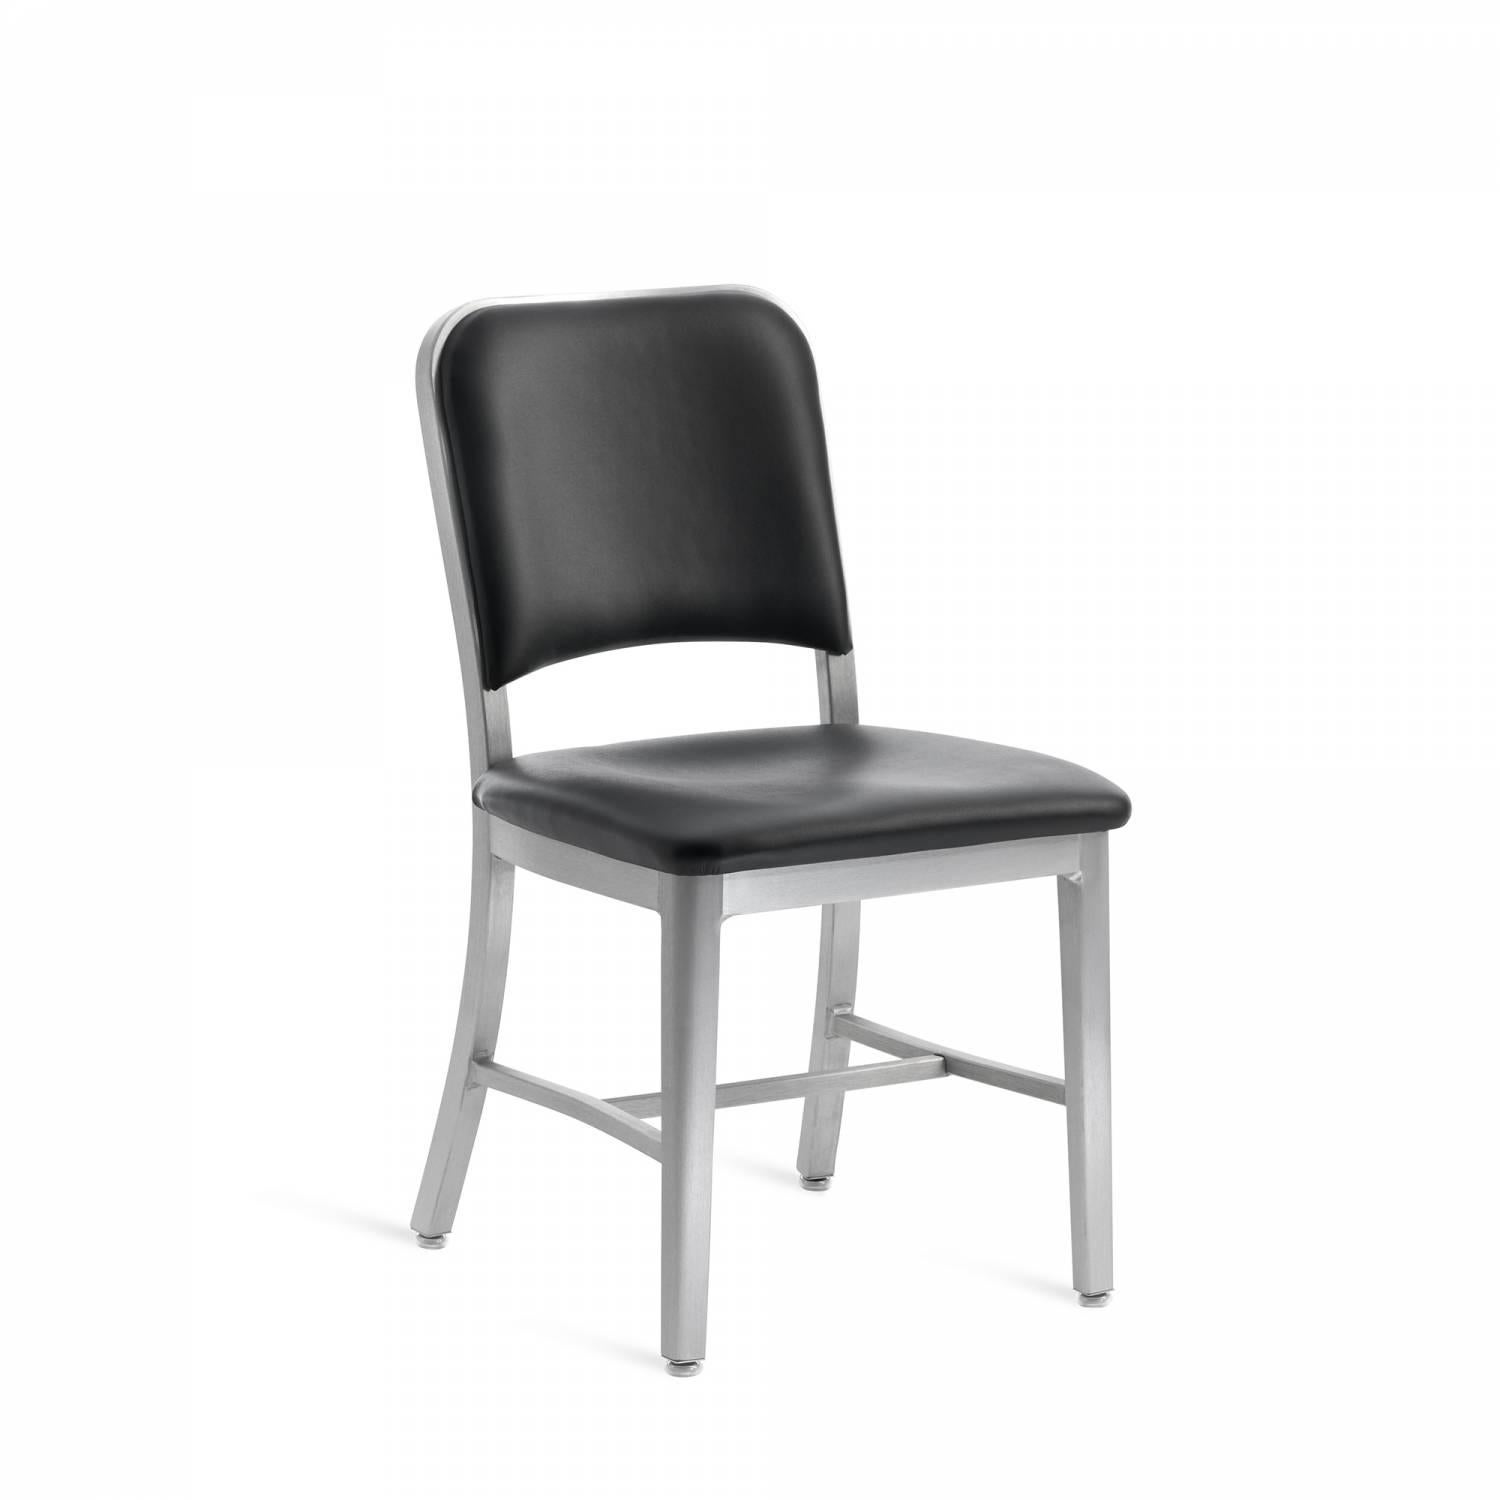 First built for use on submarines in 1944, the Navy chair has been in continuous production ever since. With the famous 77 step Process, our craftsmen take soft, recycled aluminum, hand form and weld it- then temper it for strength. Finally, the